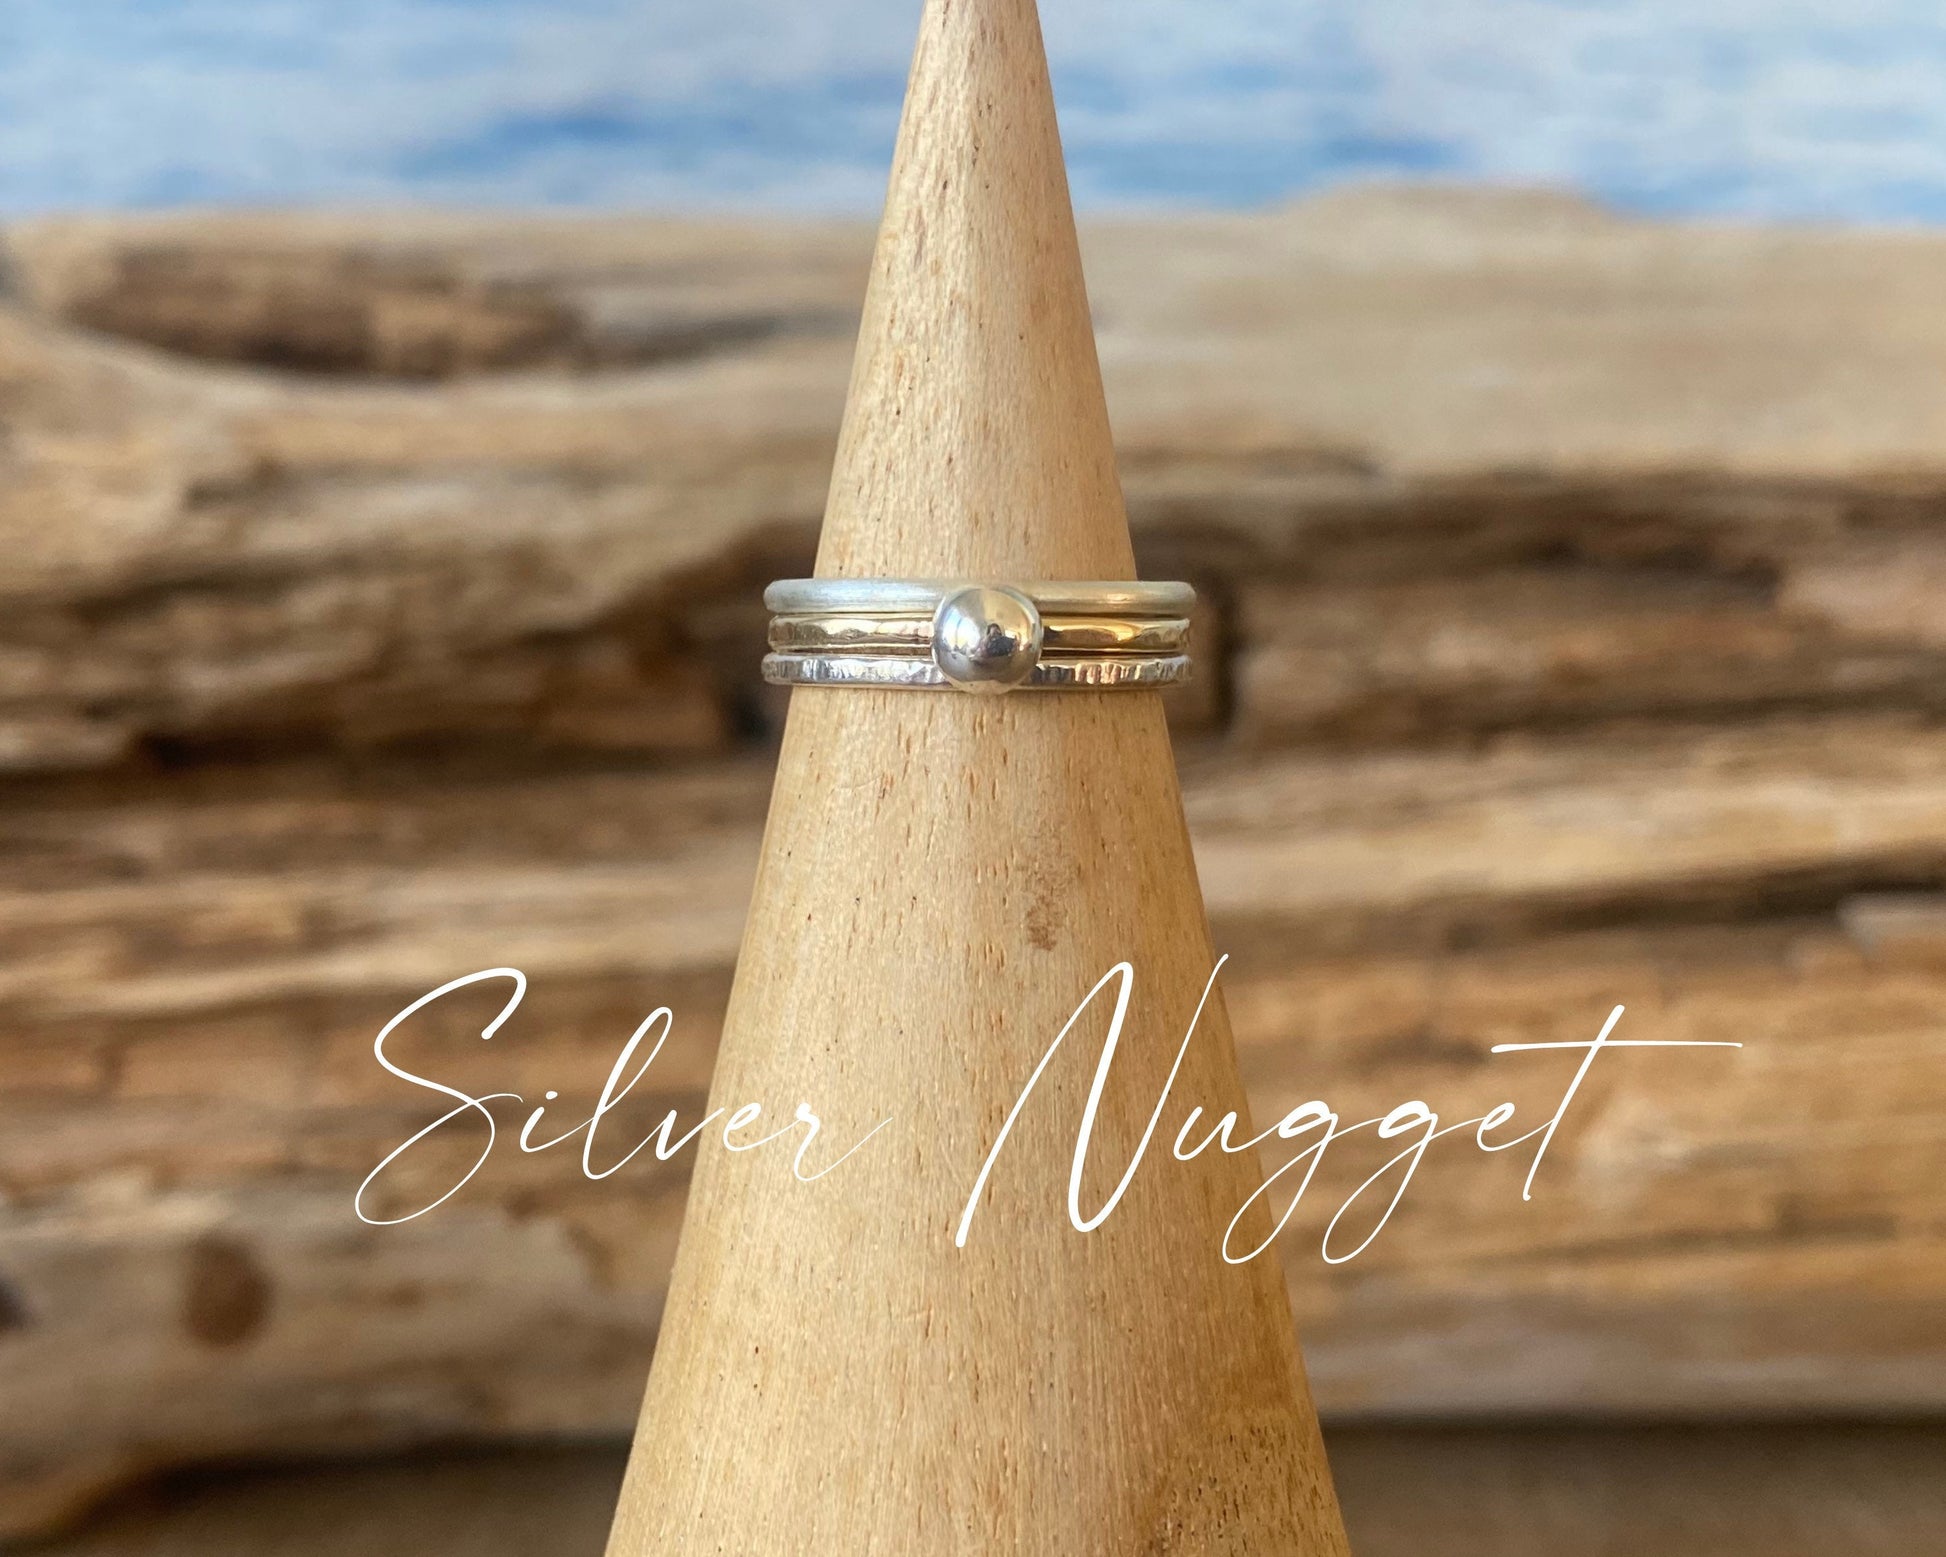 9ct Gold Nugget Stacking Ring Set, 925 Sterling Silver Nugget Stacking Rings, 9ct Gold and Sterling Silver 1.2mm Skinny Minimalist Ring Band